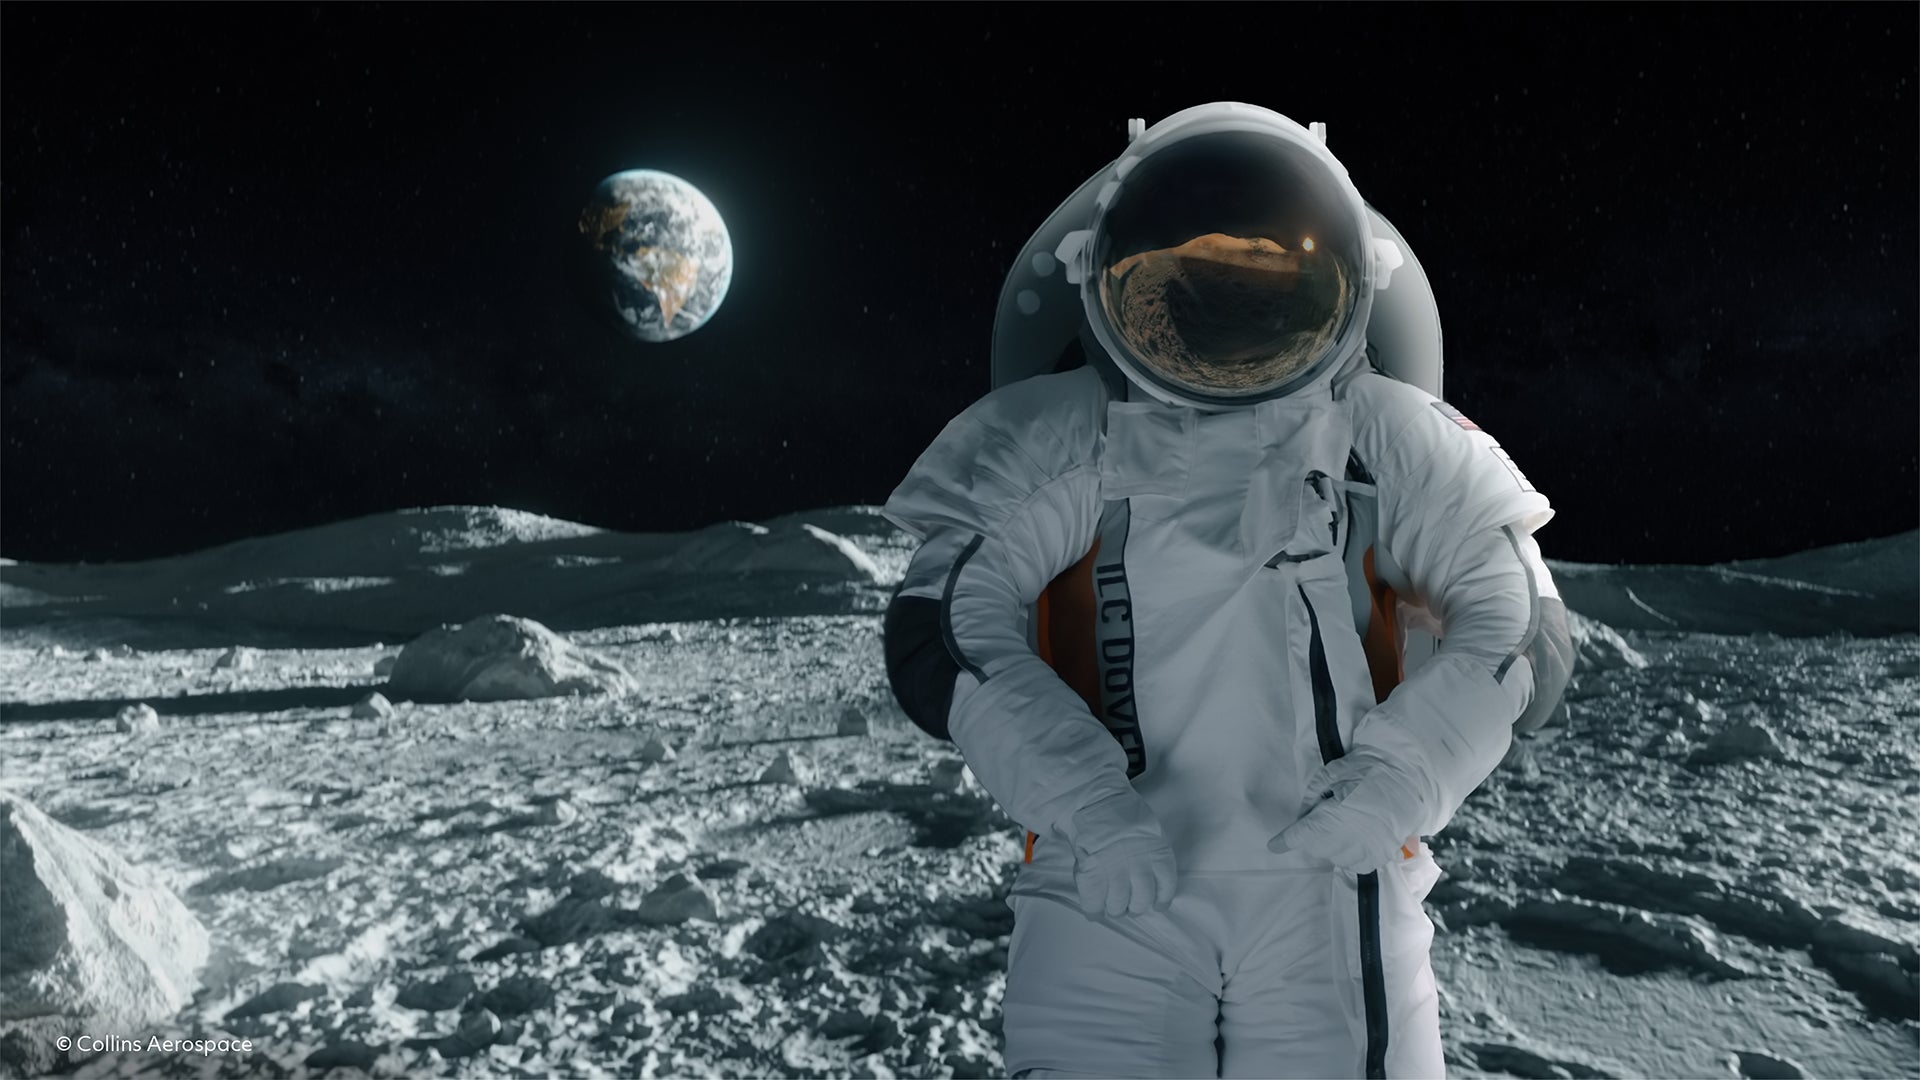 NASA's New Space Suits Will Fit Men and Women Alike (for Once)